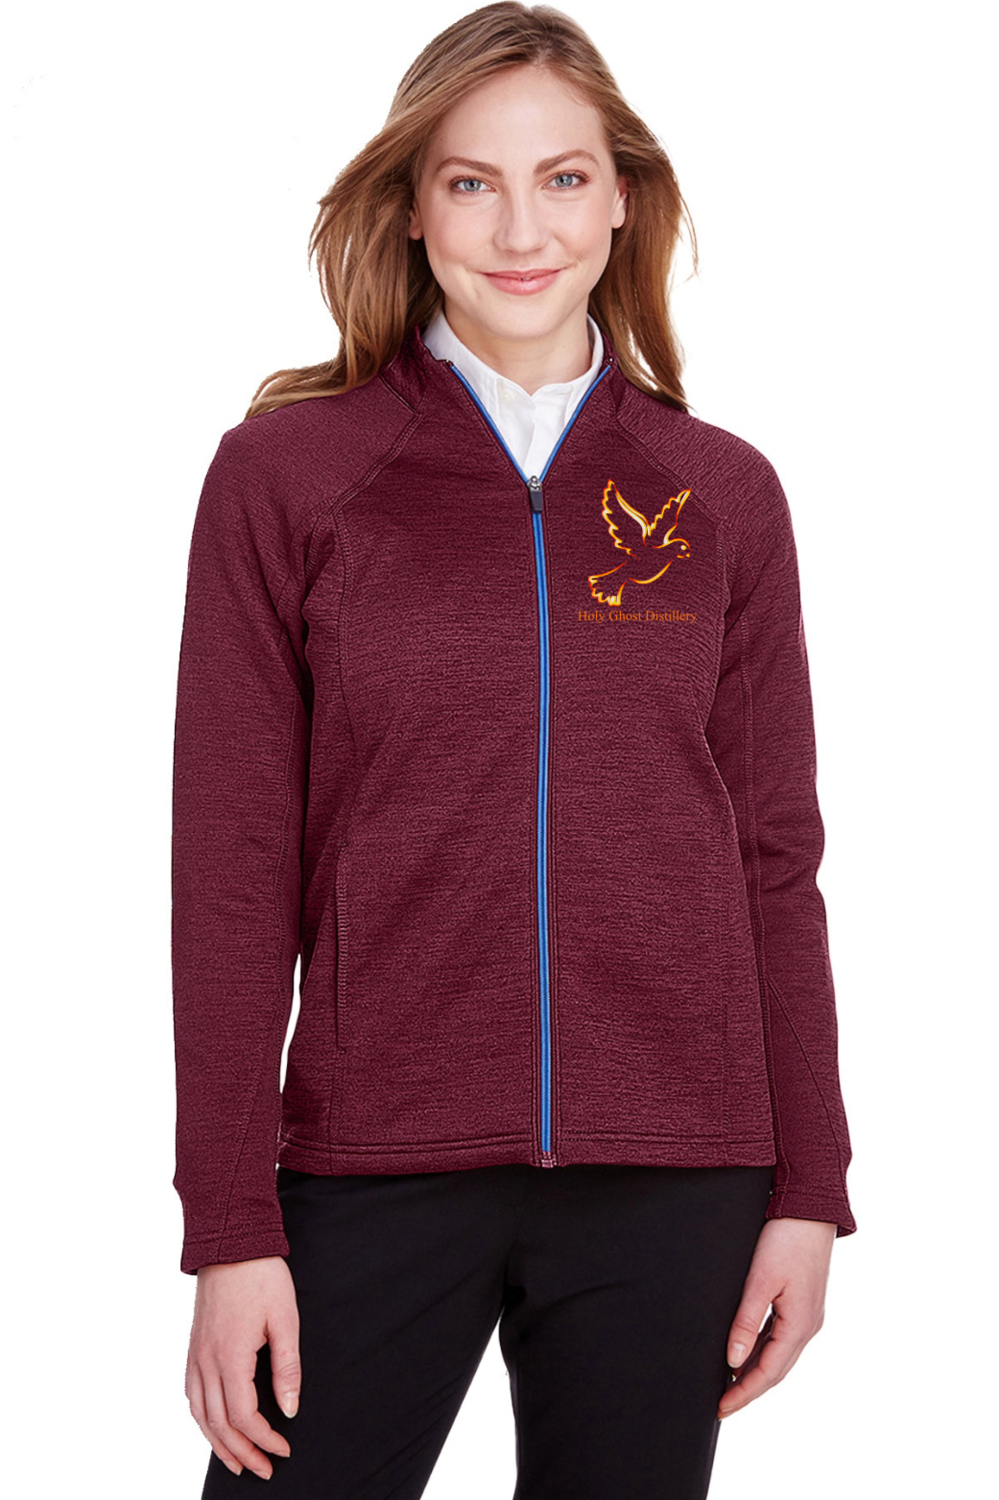 Women's Embroidered Full-Zip Jacket - SIZE Med